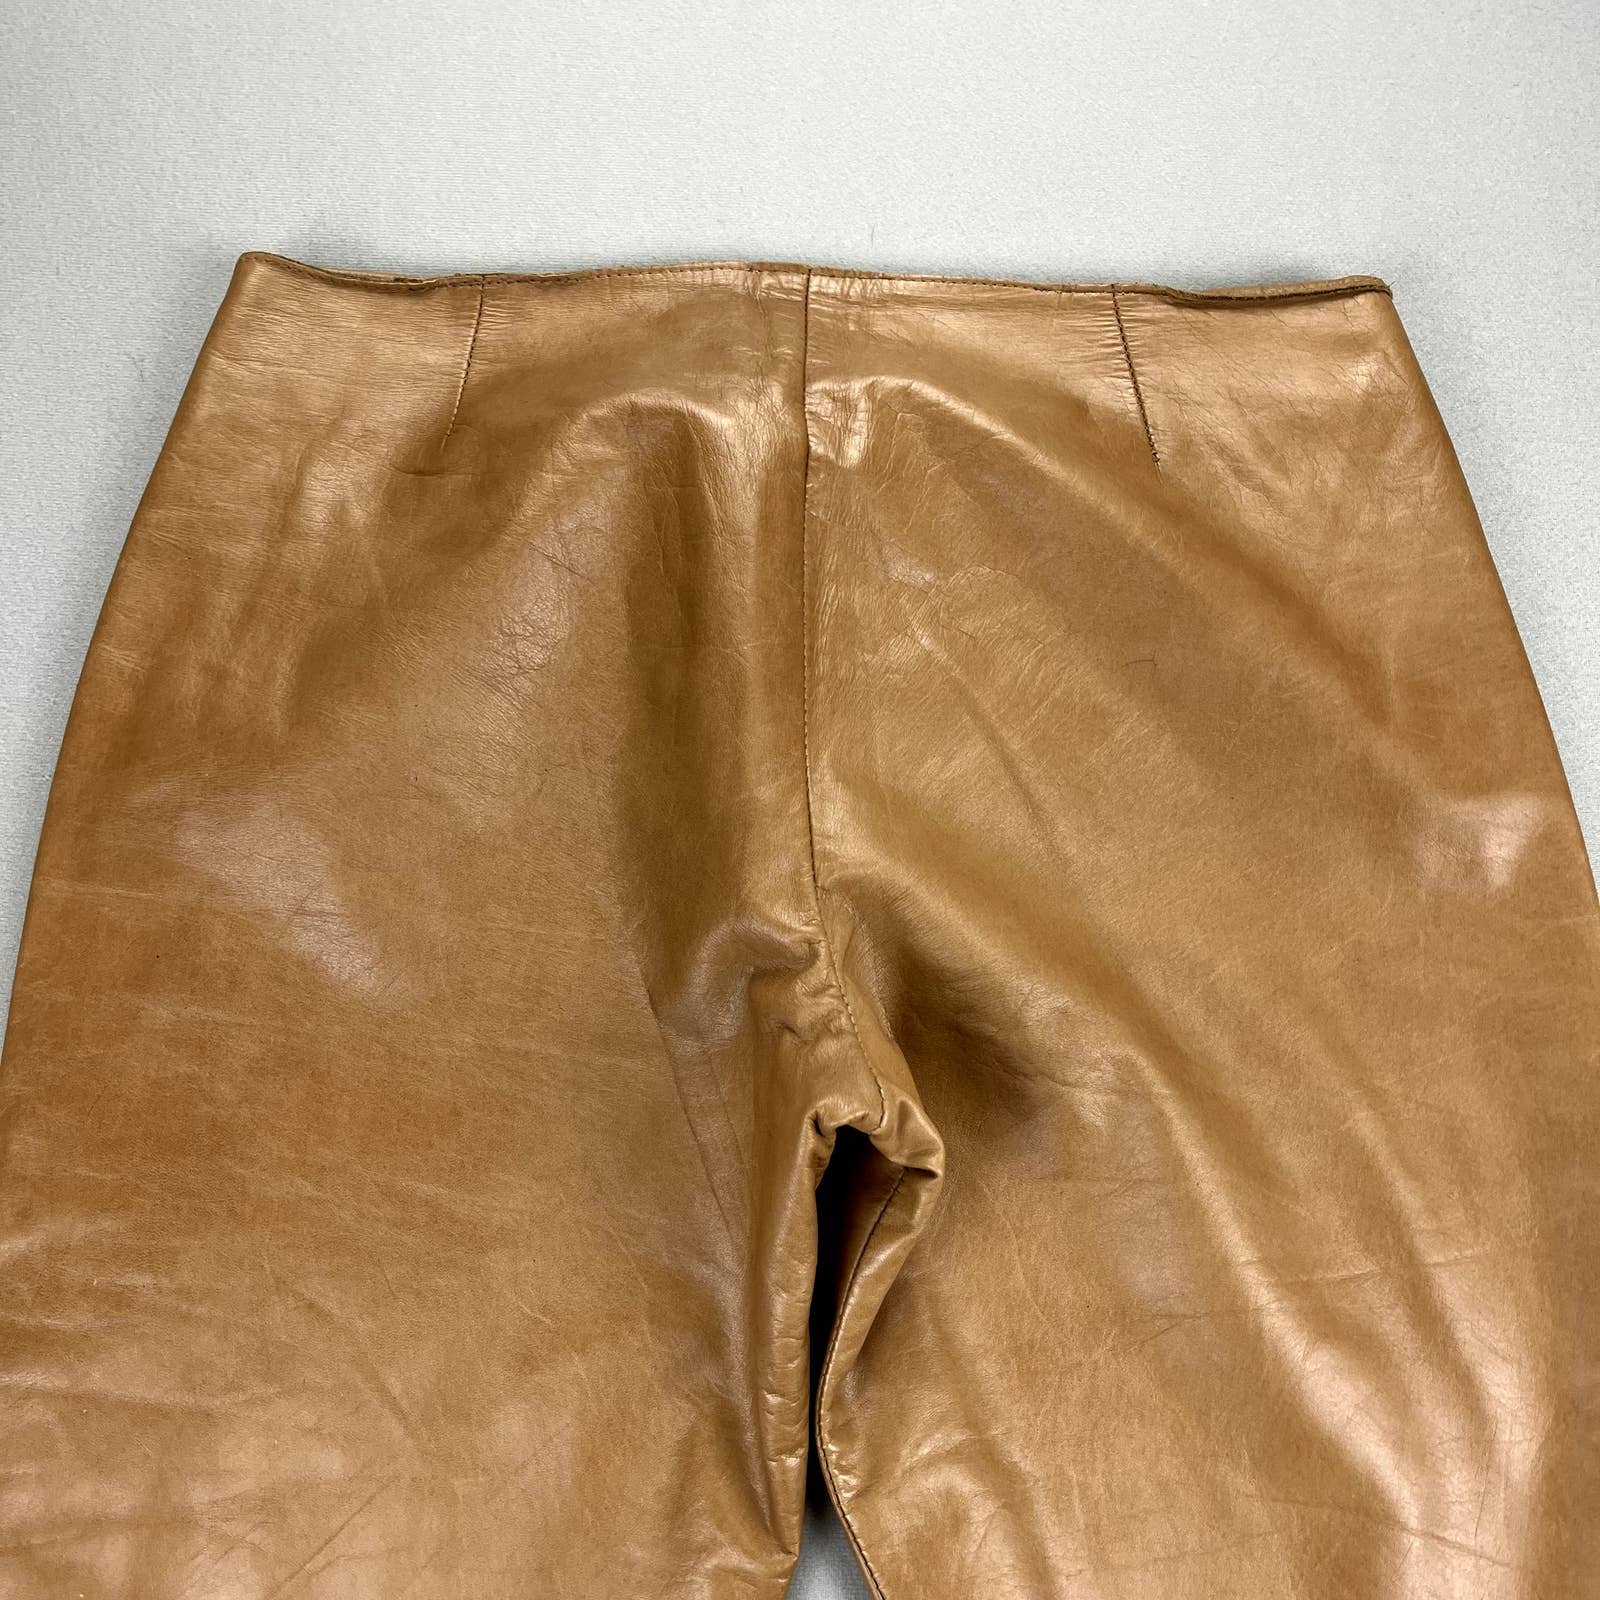 reasonable price Vintage Leather Flare Pants Womens 8 Tan Brown Bisou Bisou Michele Bohbot 90s hW7tbhUsC Factory Price